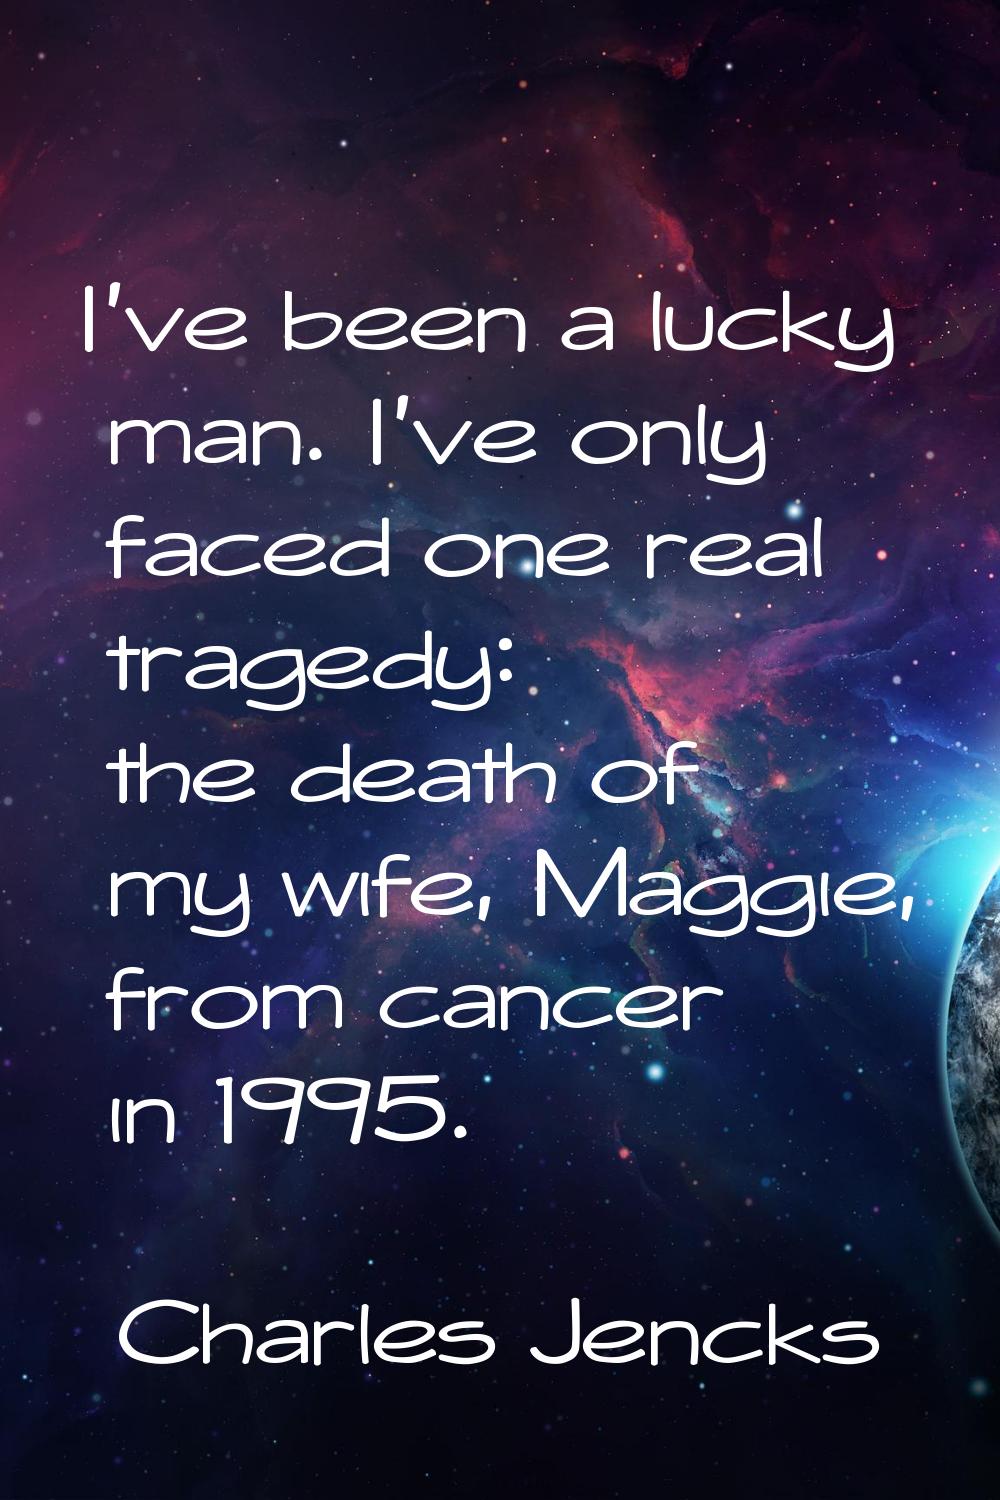 I've been a lucky man. I've only faced one real tragedy: the death of my wife, Maggie, from cancer 